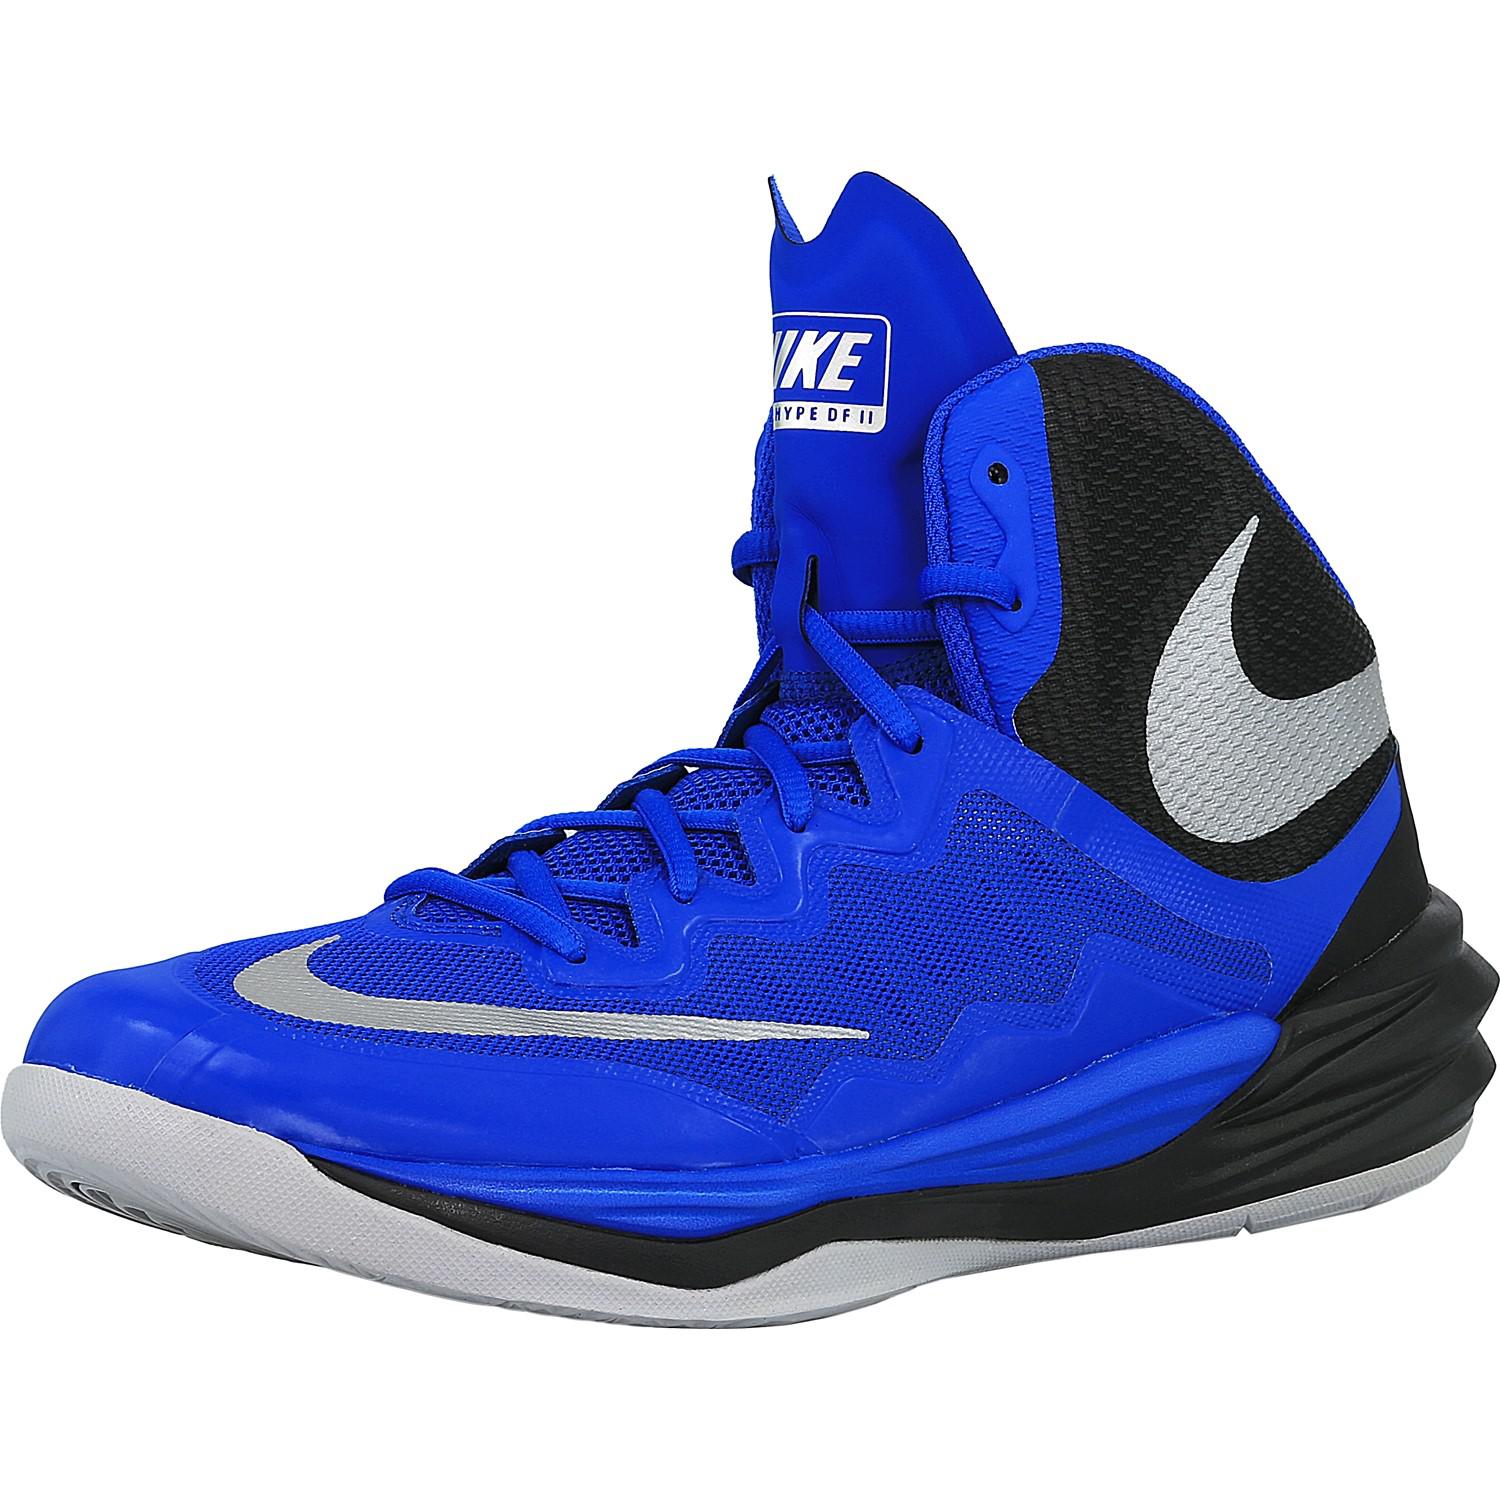 Lyst - Nike Prime Hype Df Ii 401 Ankle-high Basketball Shoe in Blue for Men